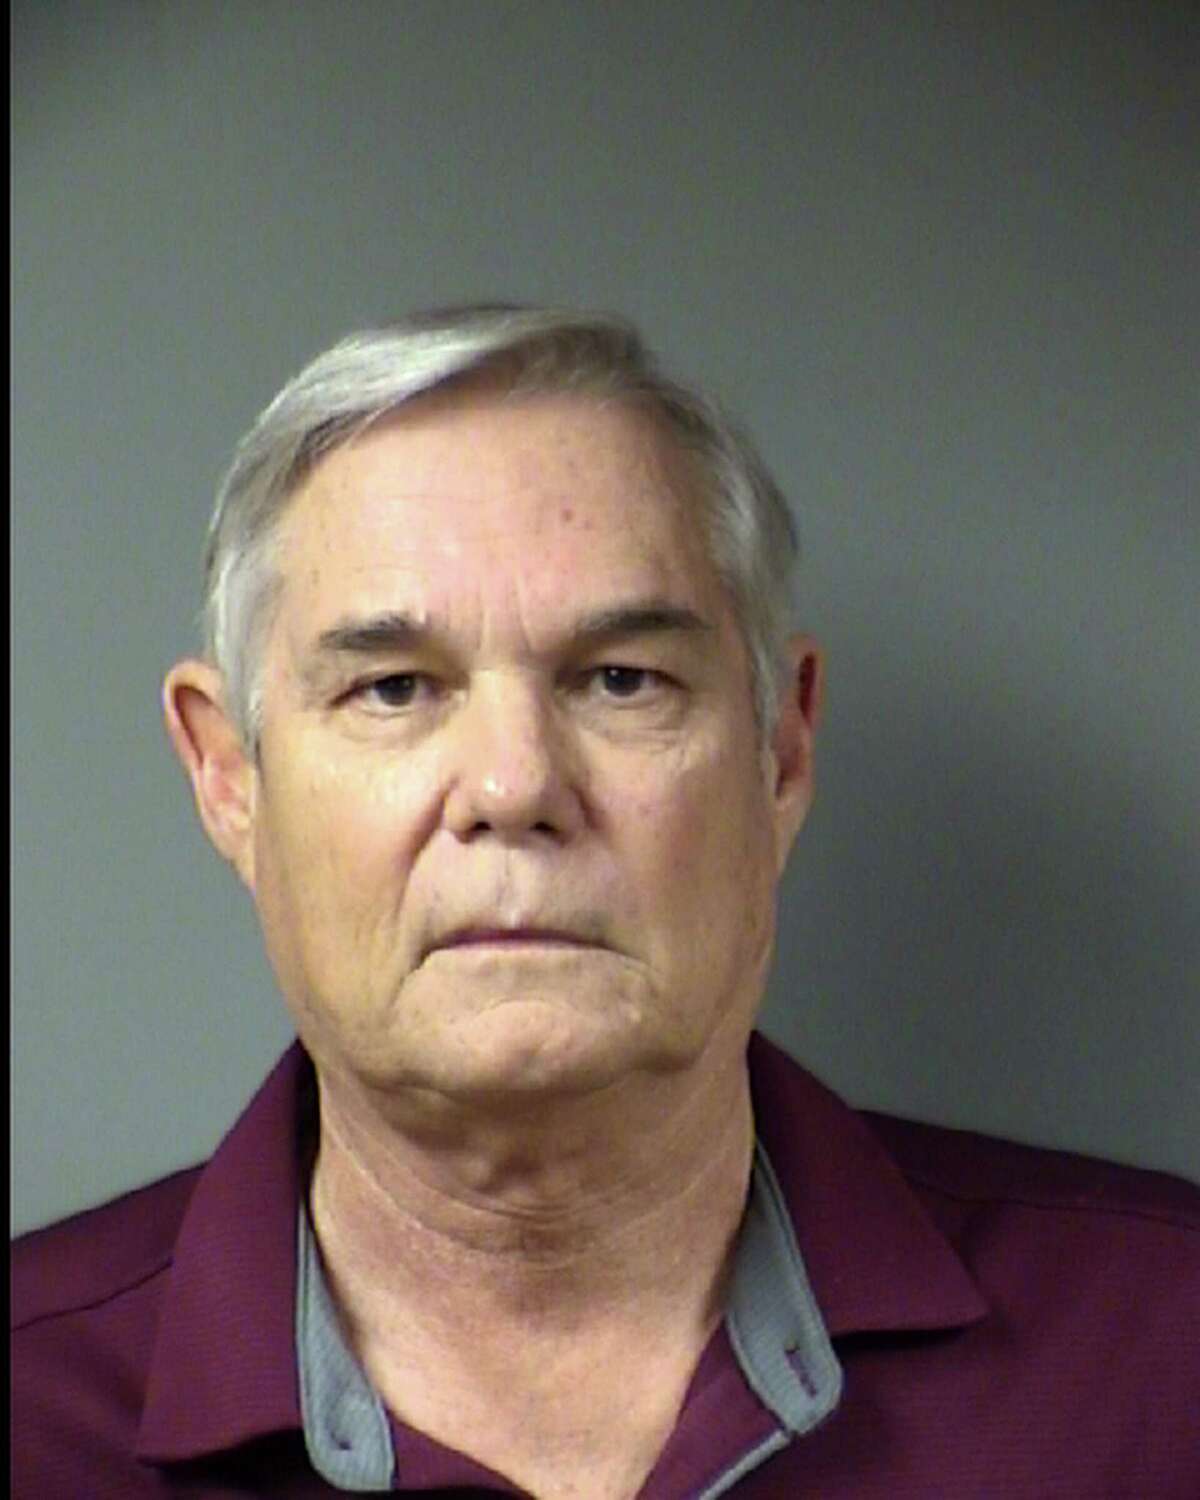 San Antonio District 10 city council member Clayton Perry is seen in a Thursday, Nov. 10, 2022 booking photo provided Nov. 10, 2022 by the Bexar County Sheriff’s Department. Perry was arrested for allegedly fleeing the scene of an auto accident he caused Sunday night on the Northeast Side.